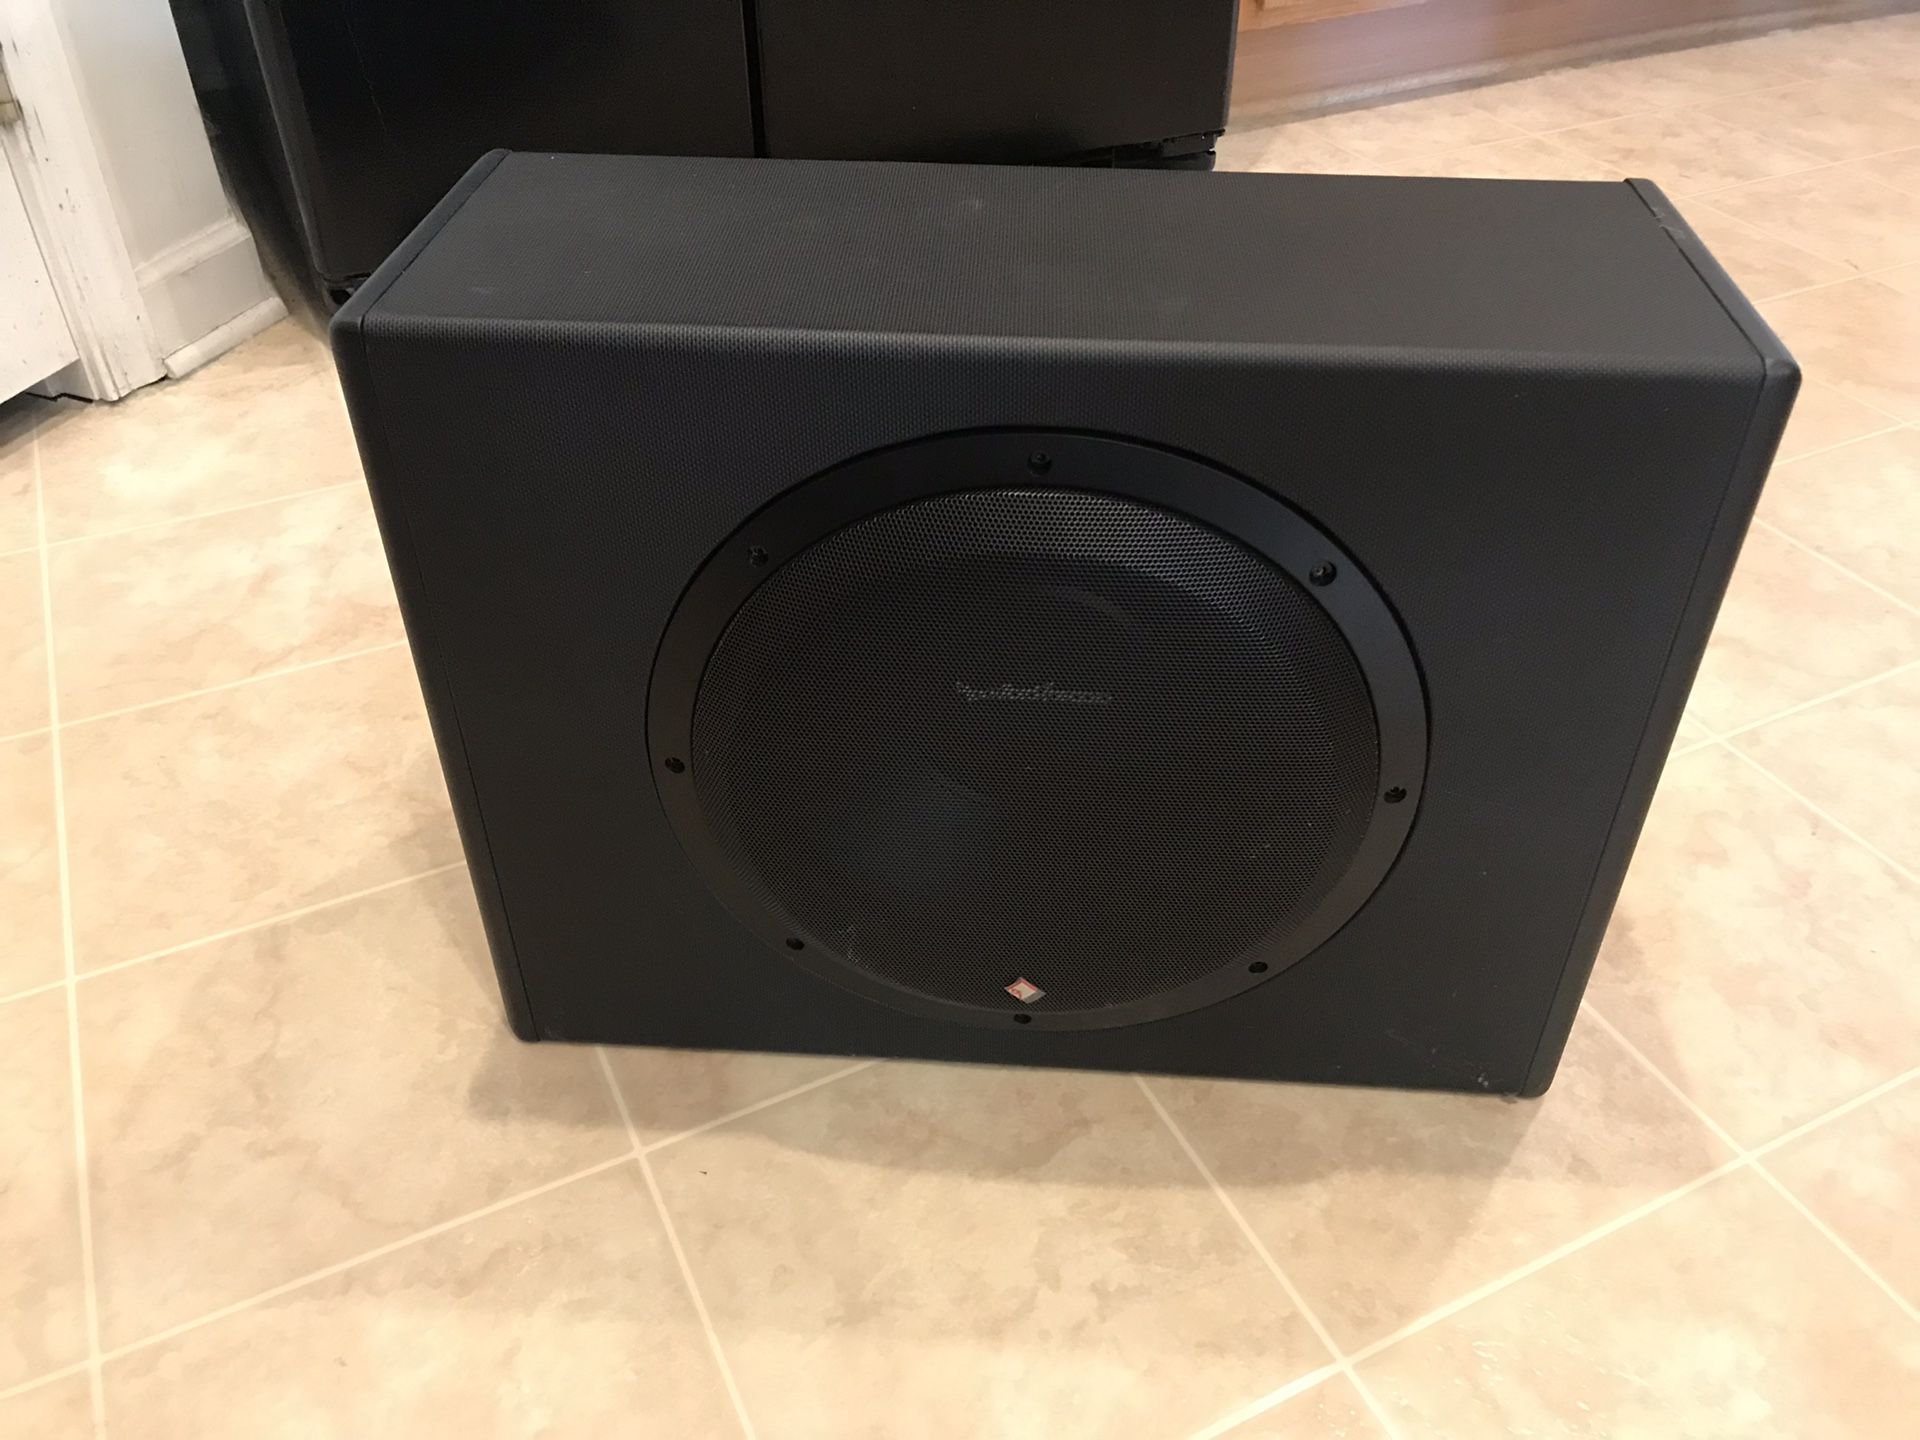 Rockford Fosgate Subwoofer P300-12 12” 300W without the cables.